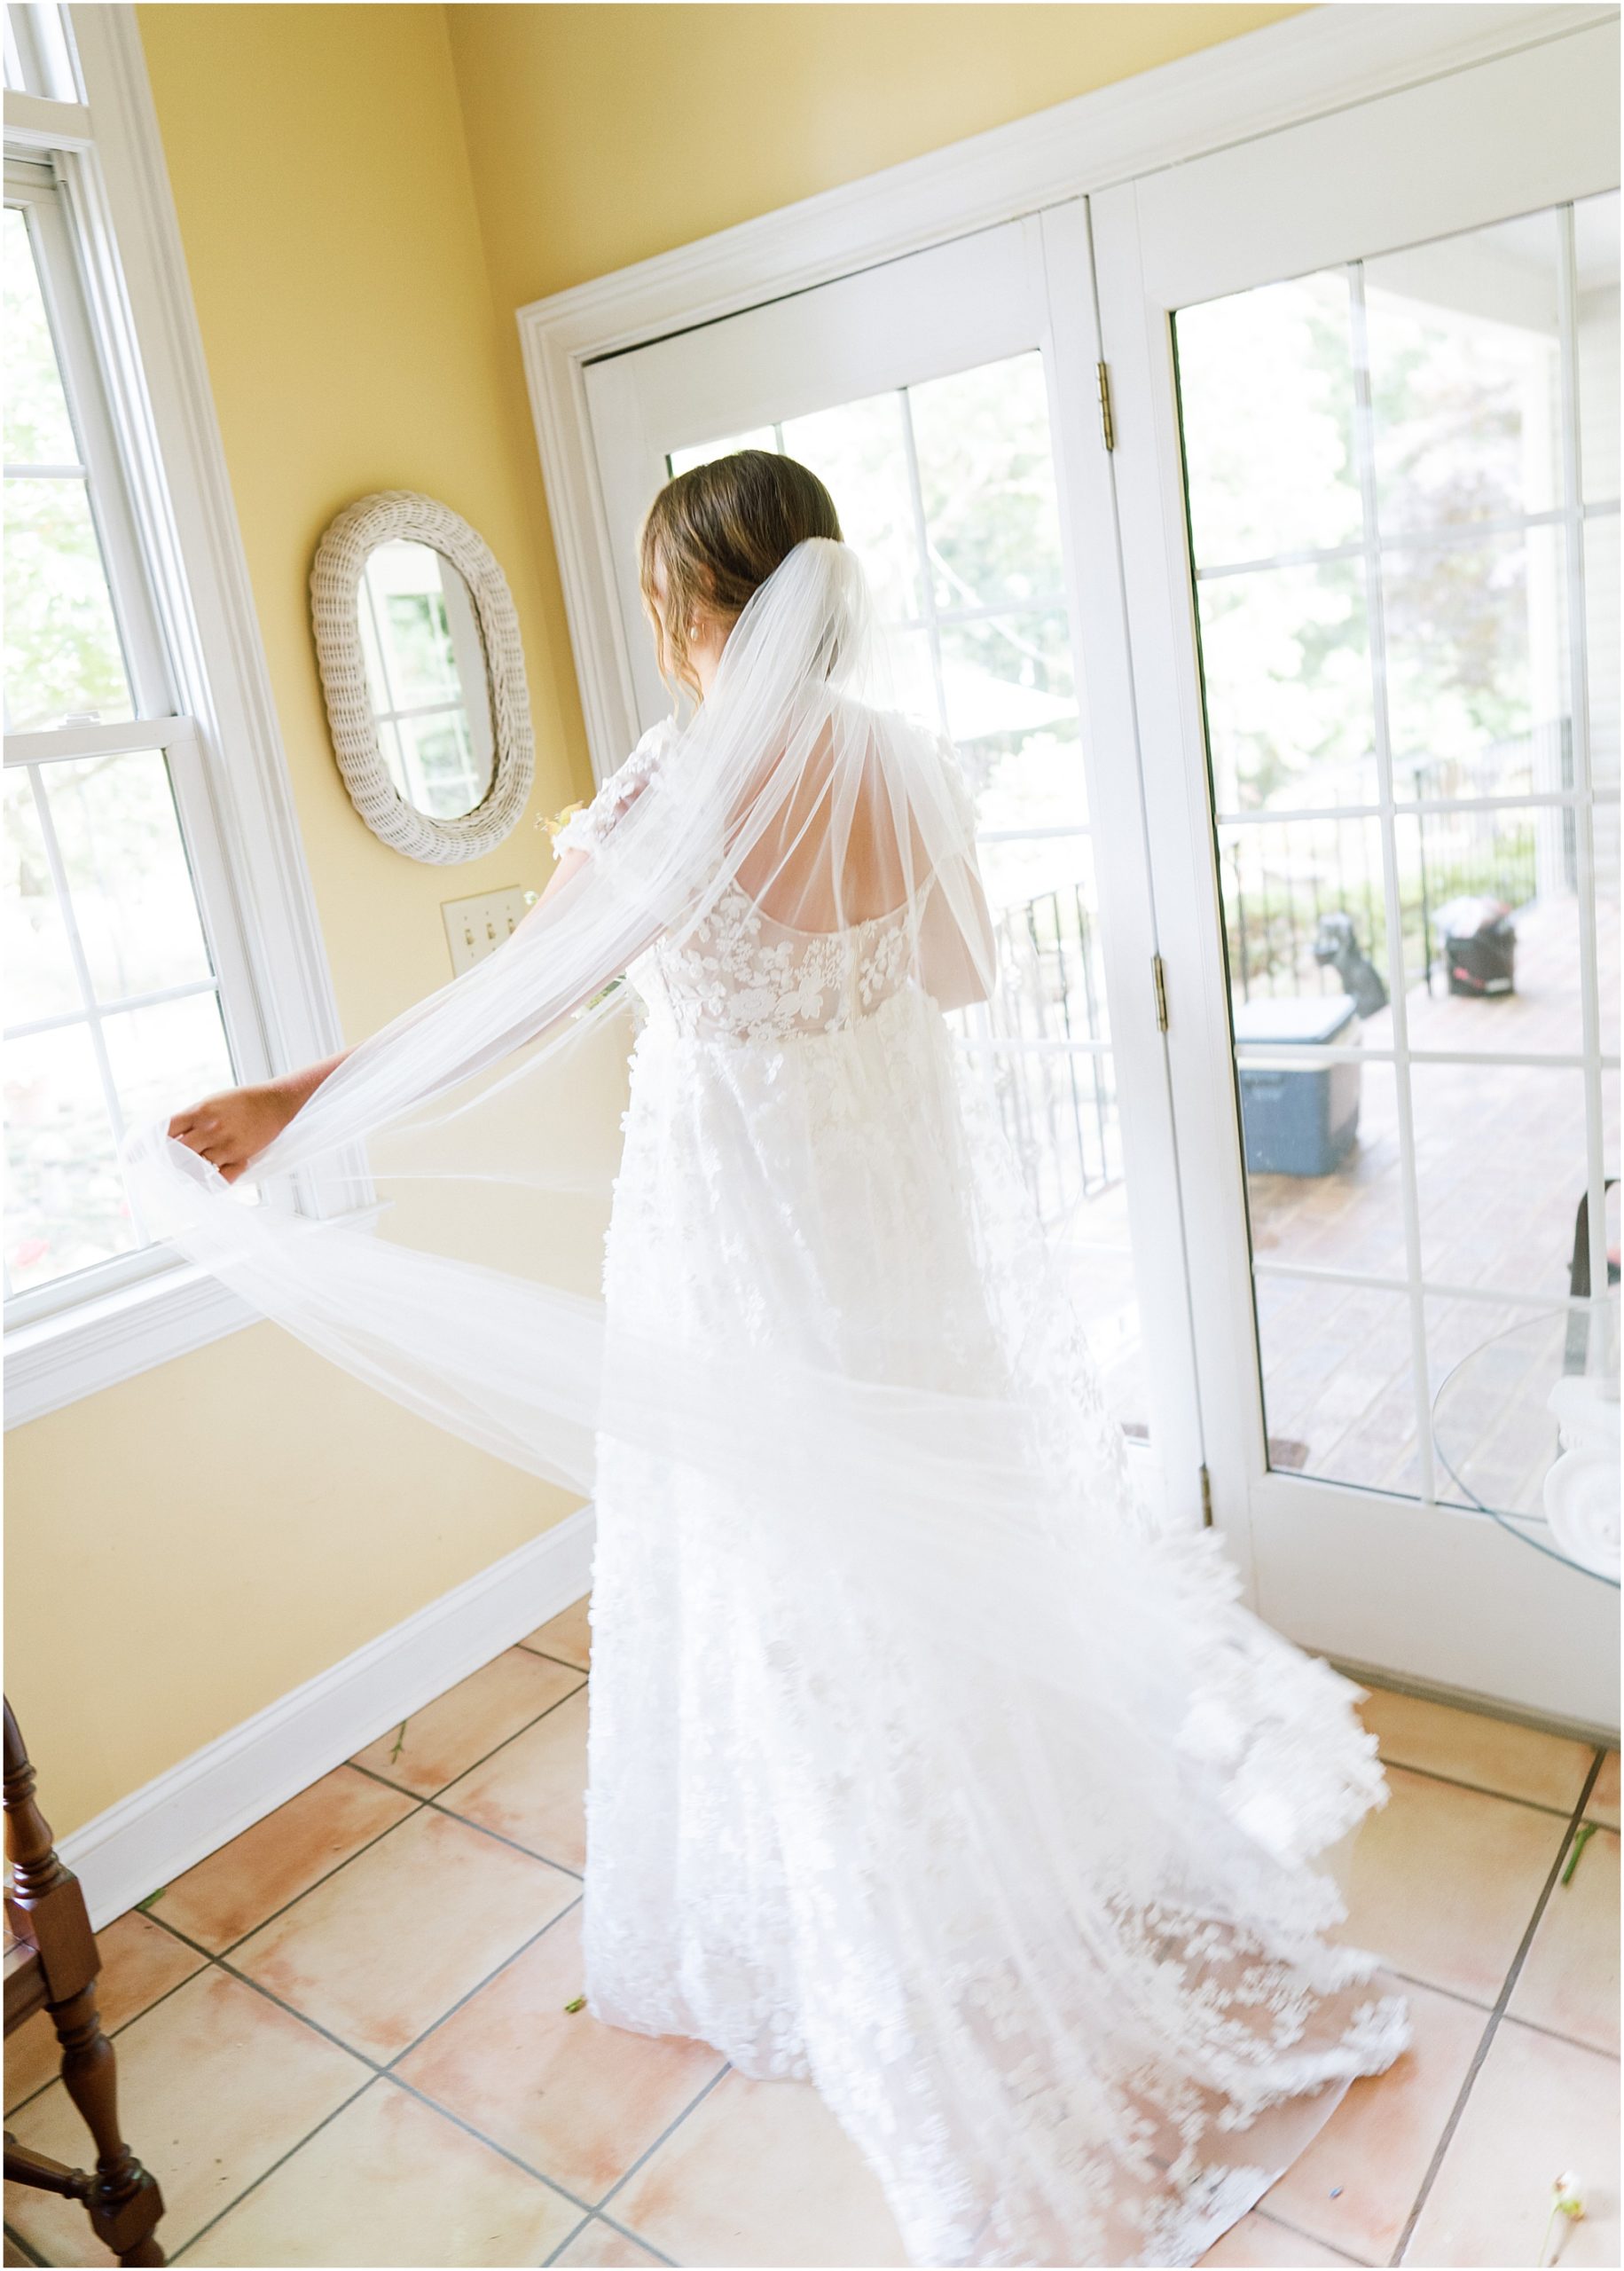 Brides with veil on spinning in her grandparents sunroom. Bride getting ready.